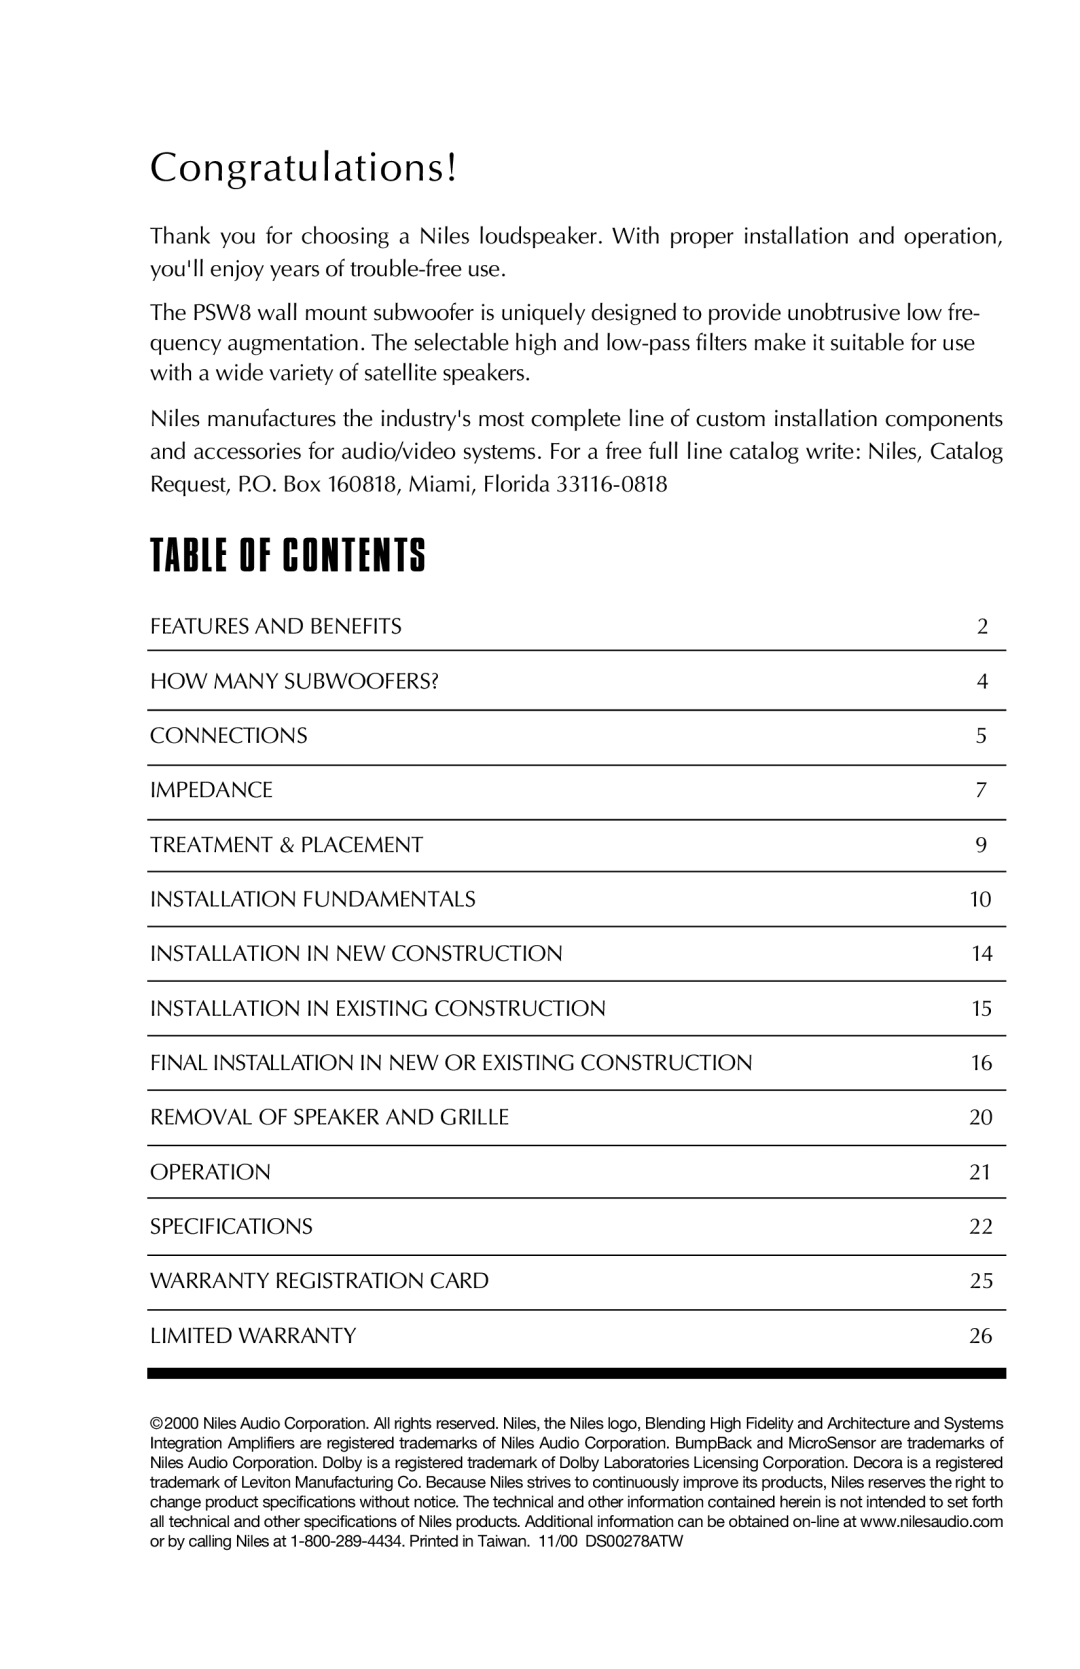 Niles Audio PSW8 manual Congratulations, Table Of Contents 